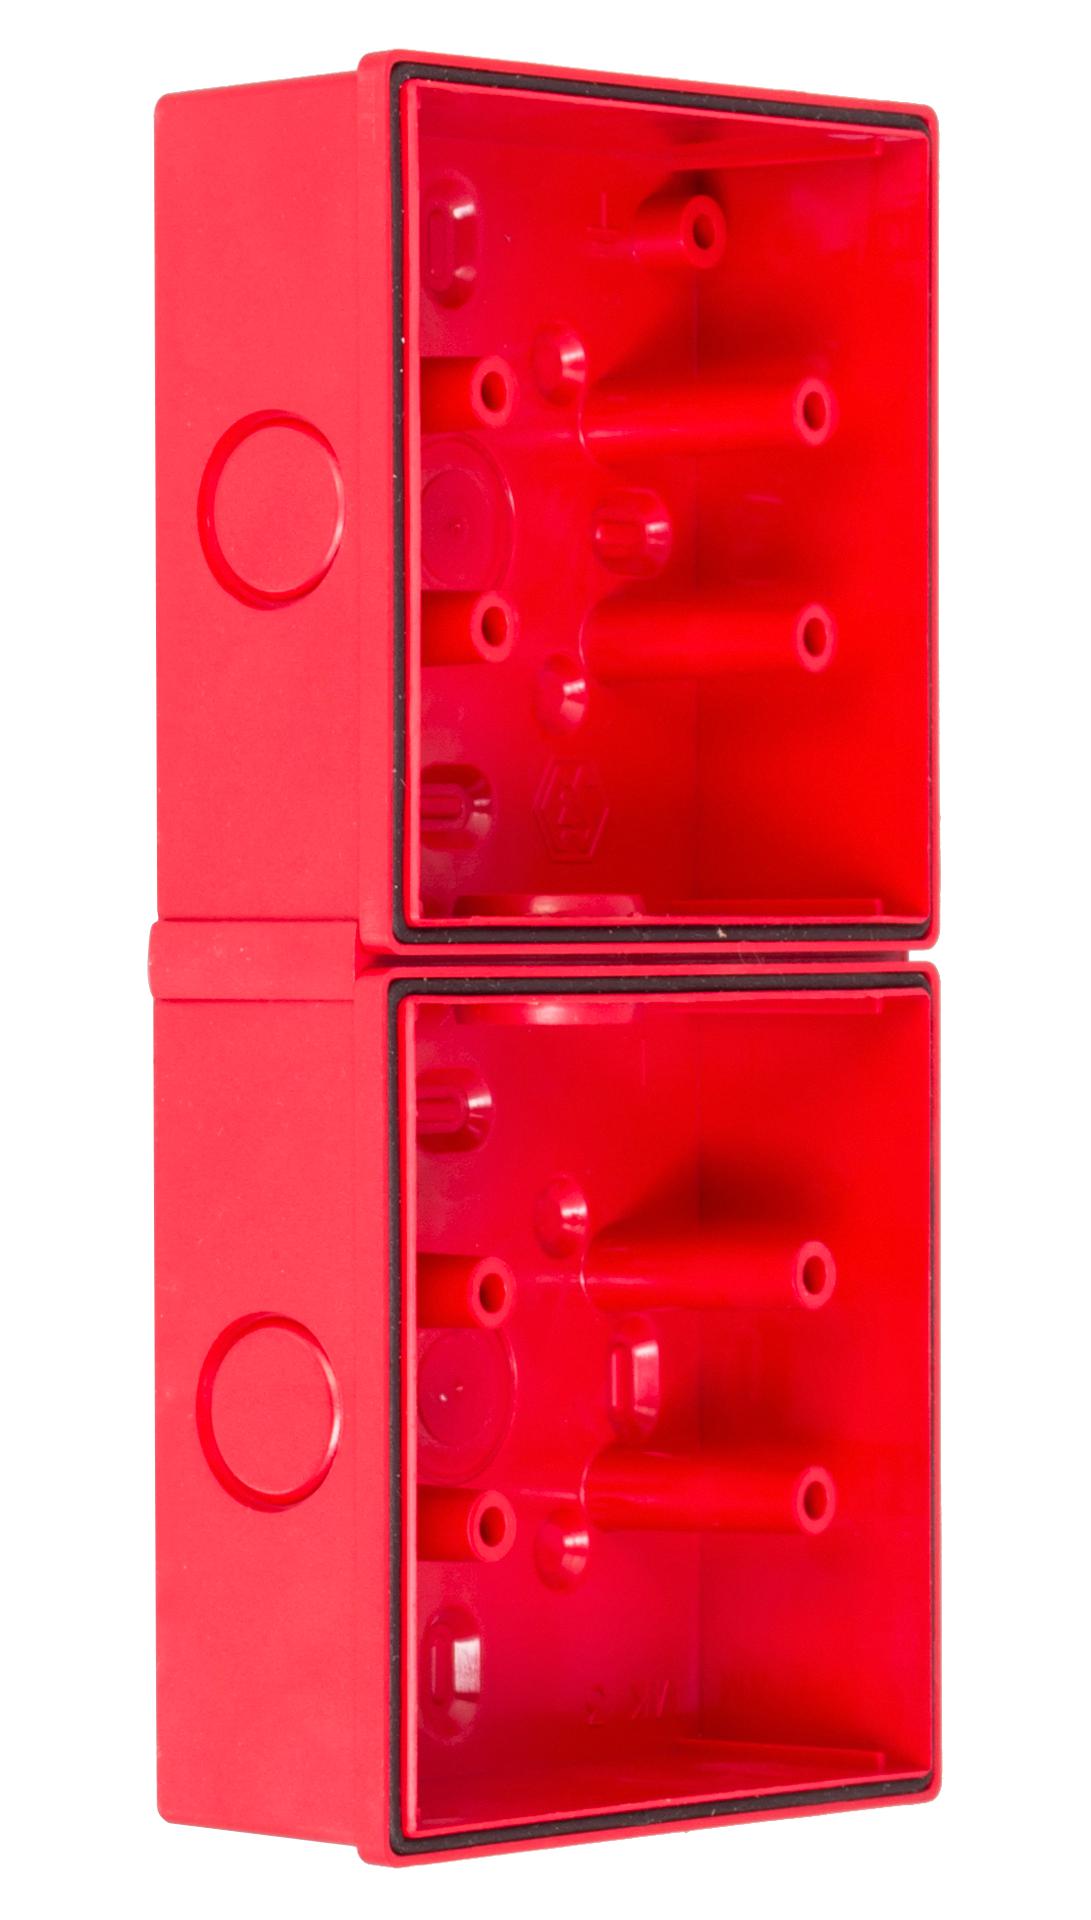 212887 DOUBLE BACK BOX, VISUAL SIGNAL INDICATOR CLIFFORD AND SNELL